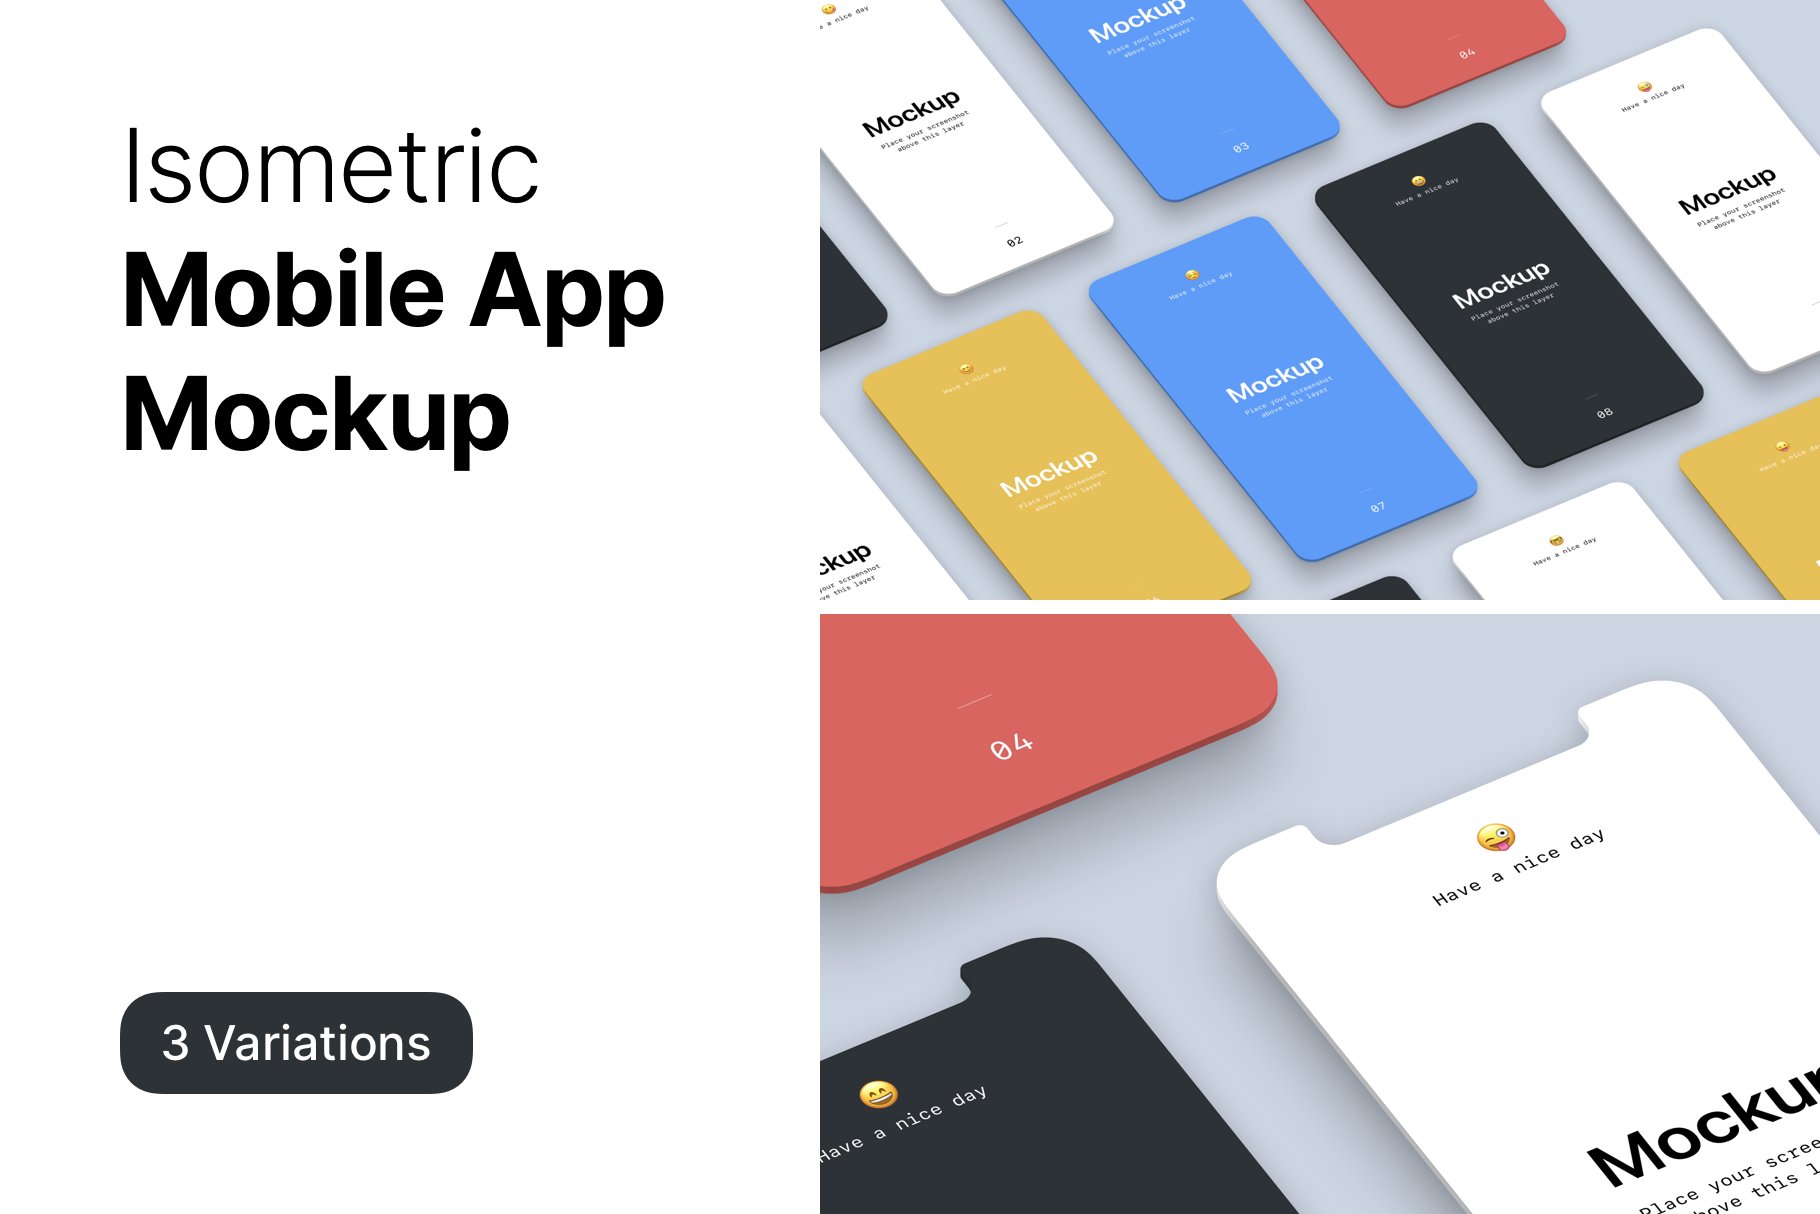 Isometric Mobile App Mockup cover image.